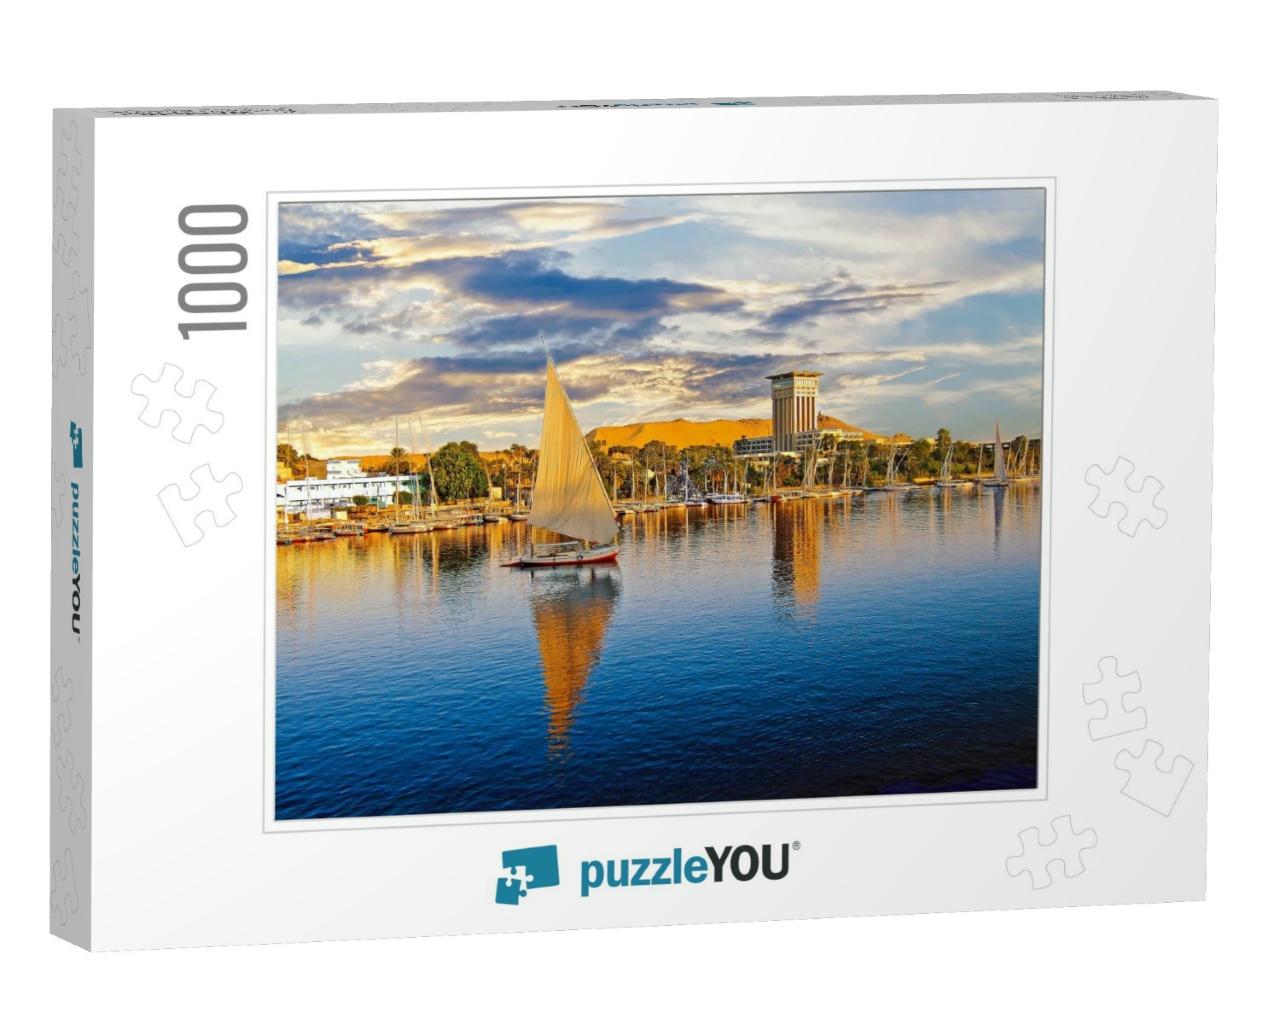 Luxor on the River Nile is a Popular Place for Tourist Bo... Jigsaw Puzzle with 1000 pieces